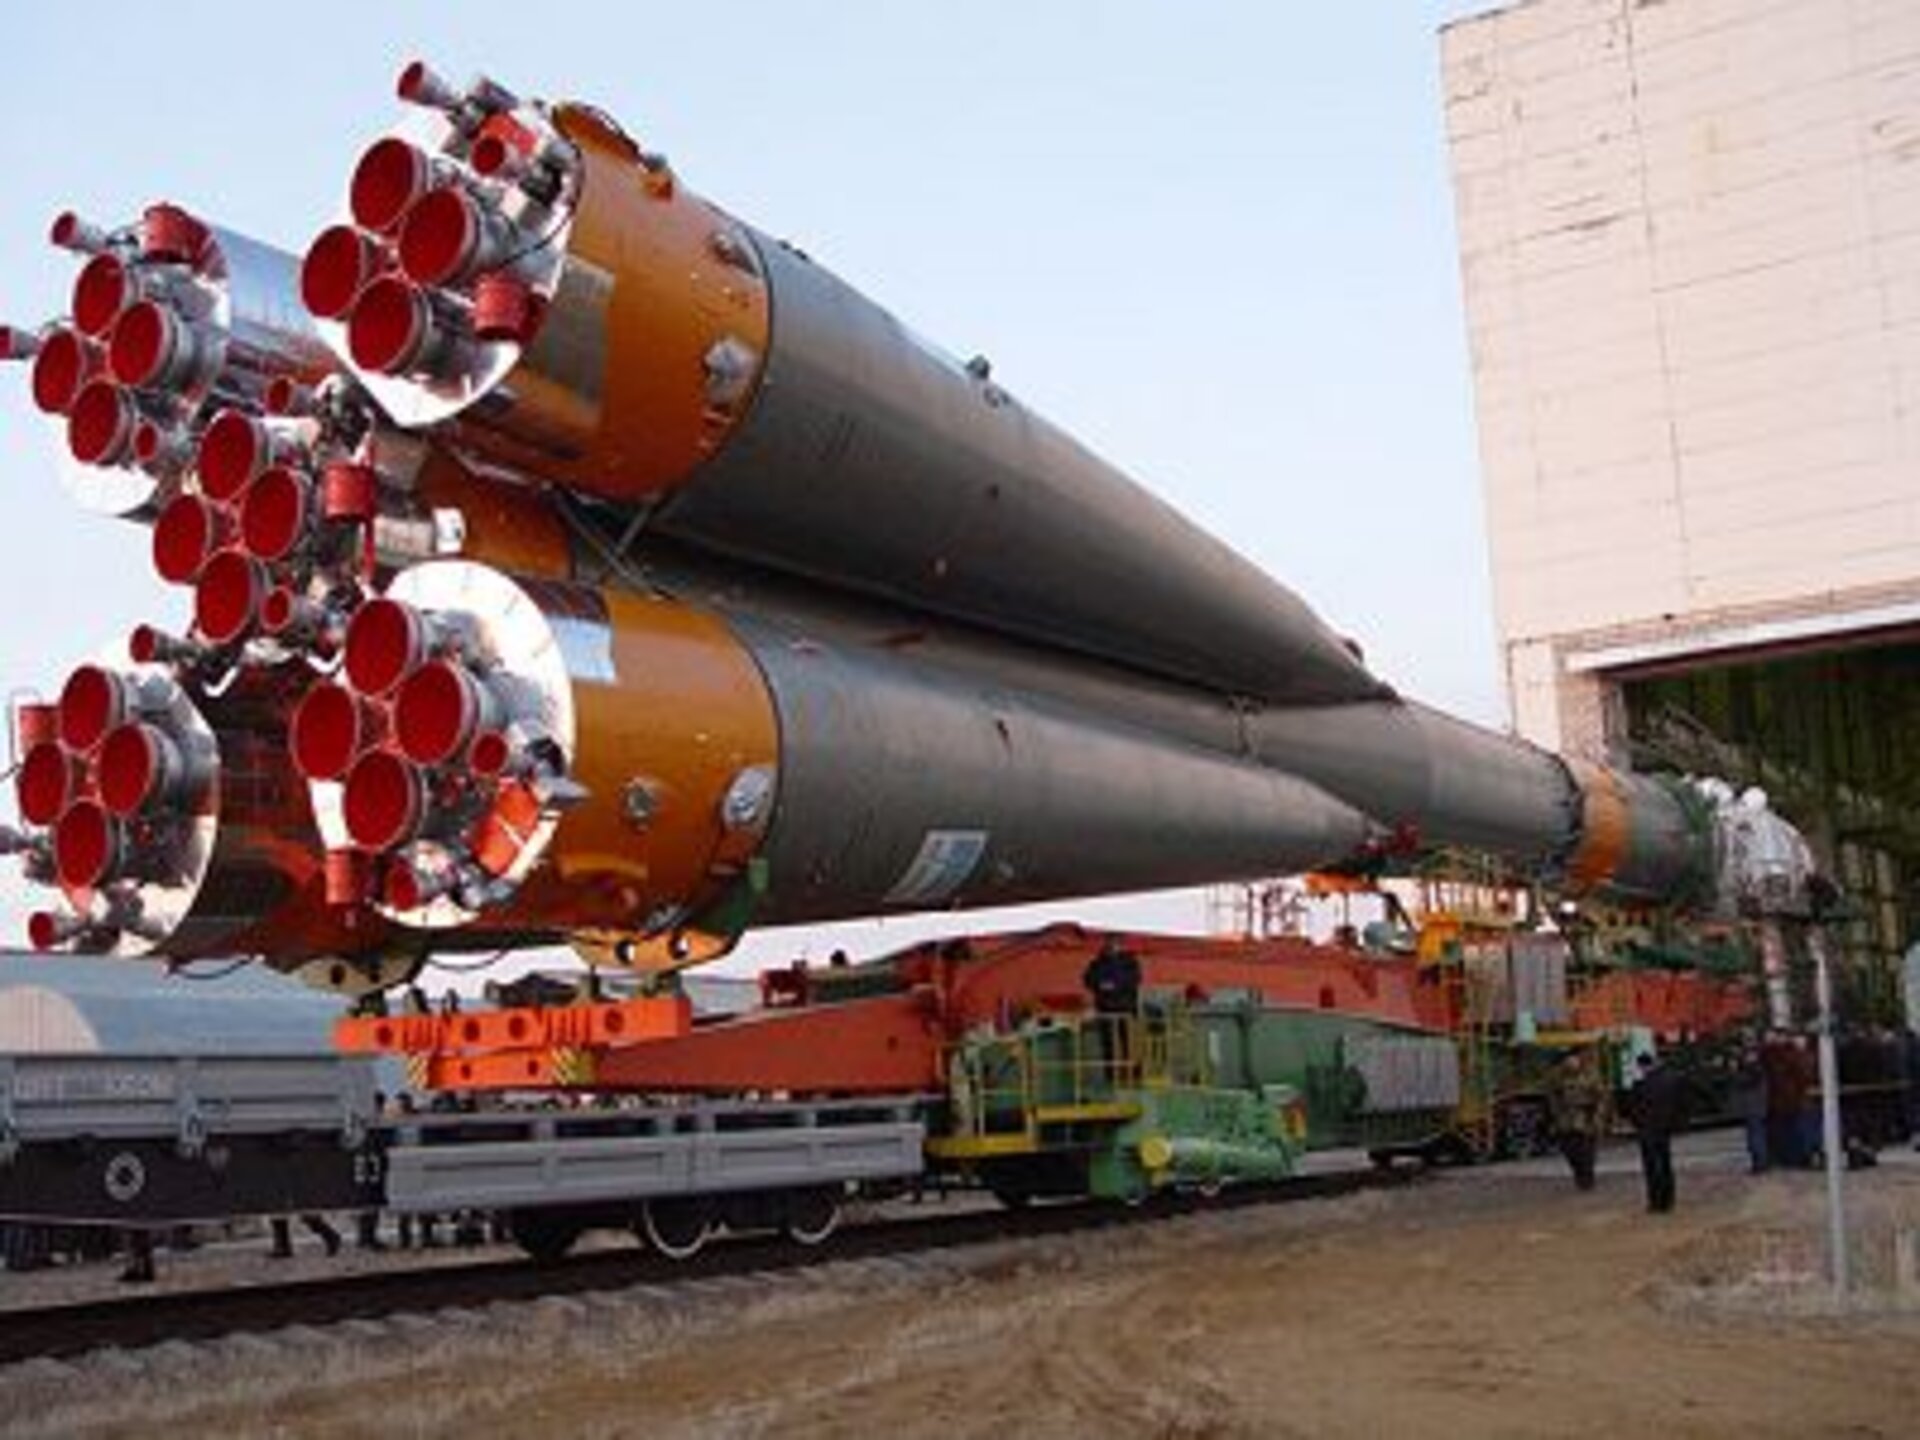 Soyuz launcher is rolled out to the launch pad